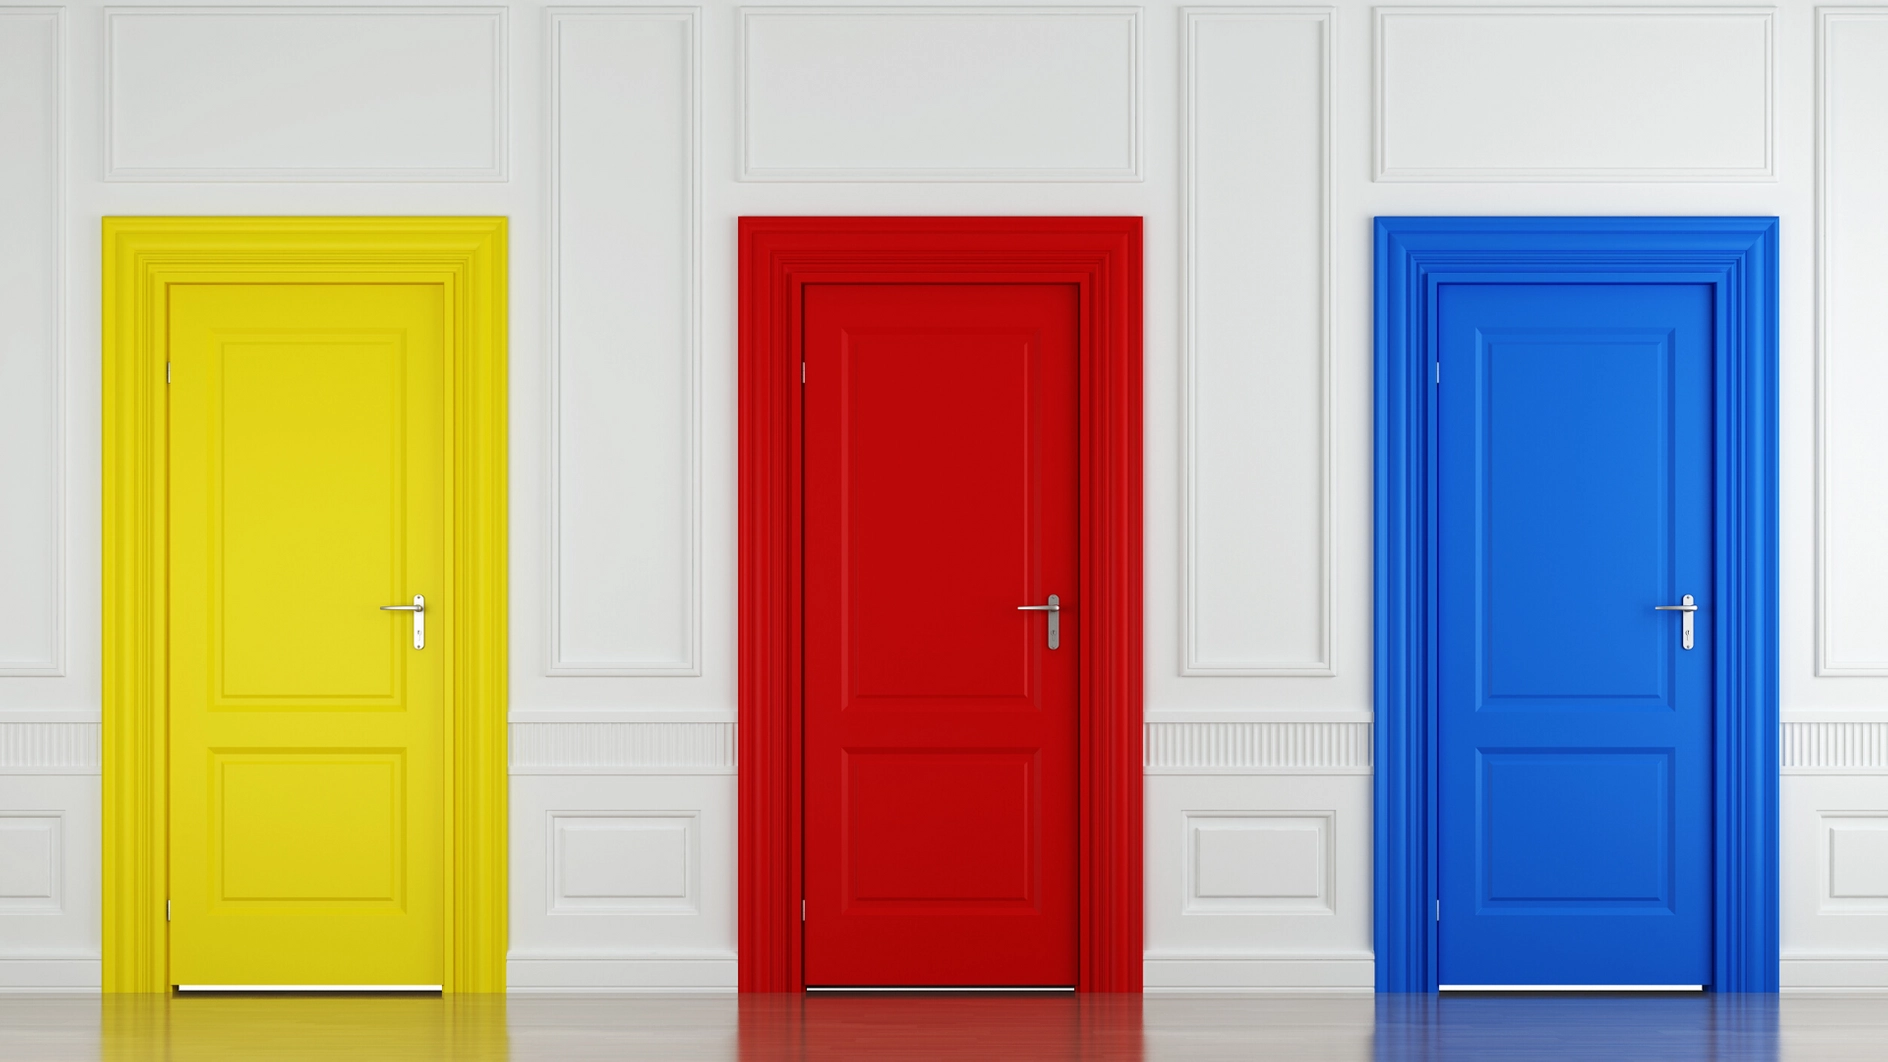 Image showing three doors - yellow, red and blue